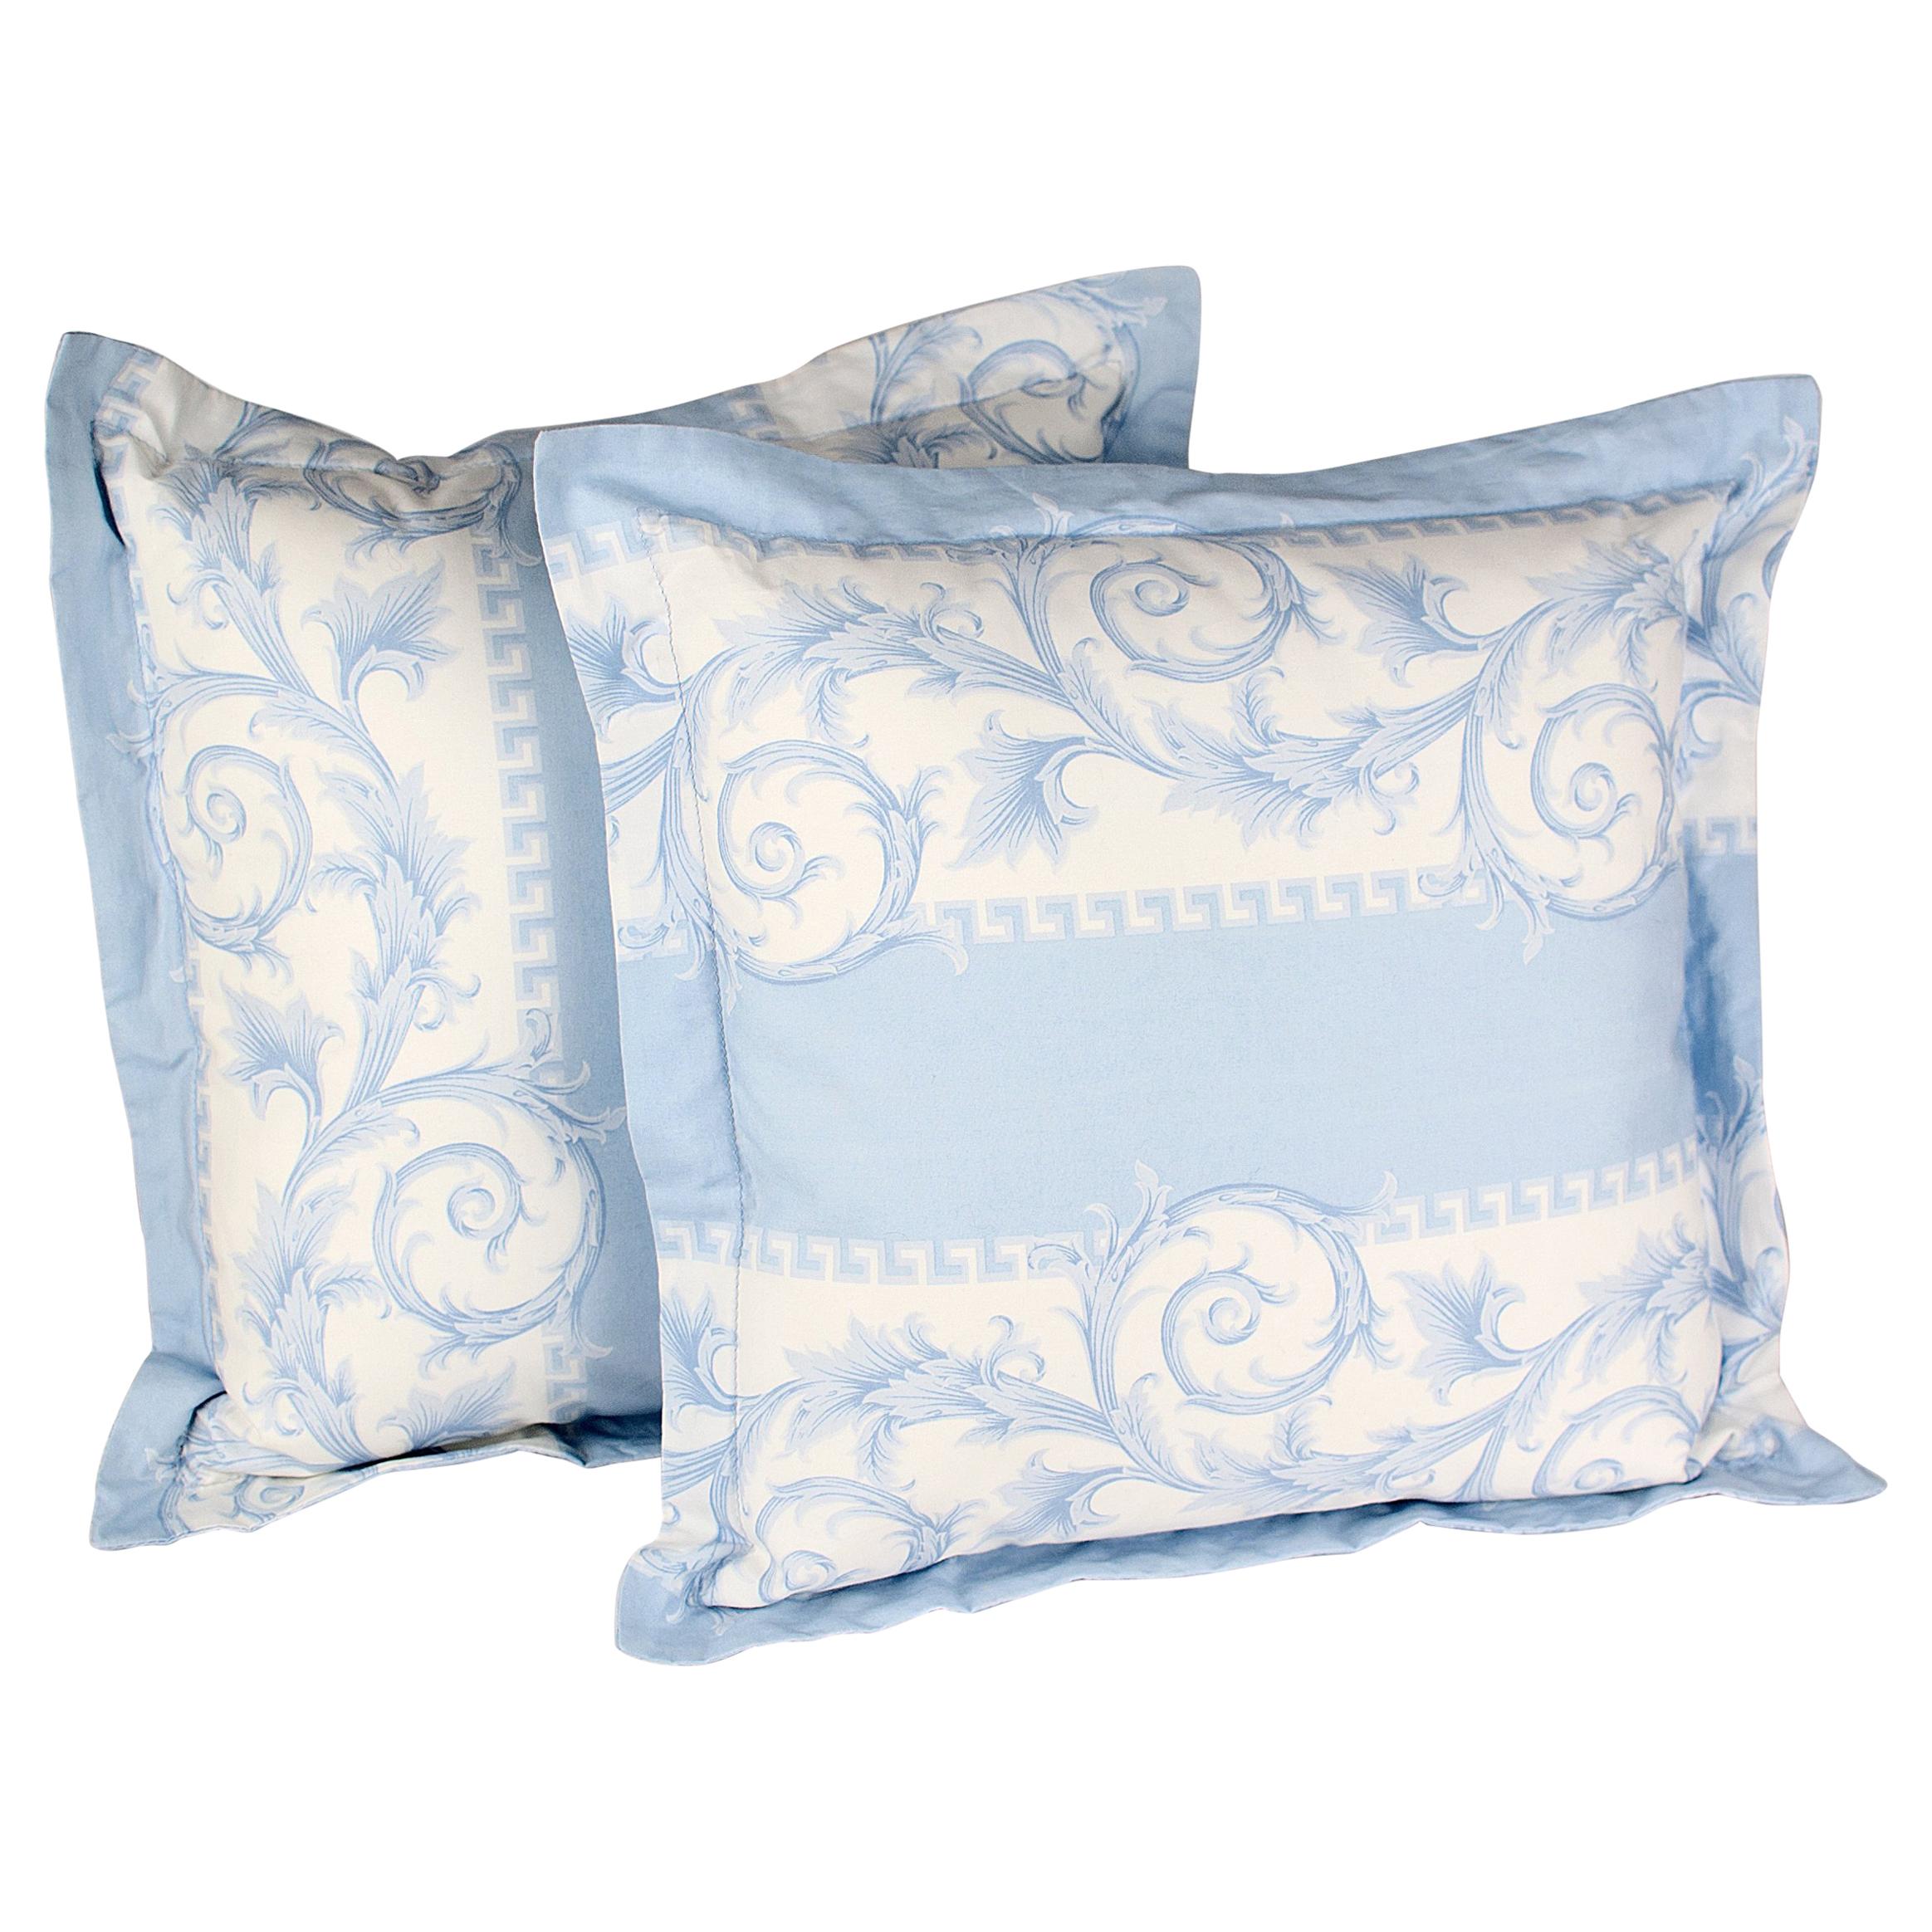 SET of TWO VERSACE BLUE WHITE BAROCCO PRINT PILLOWS